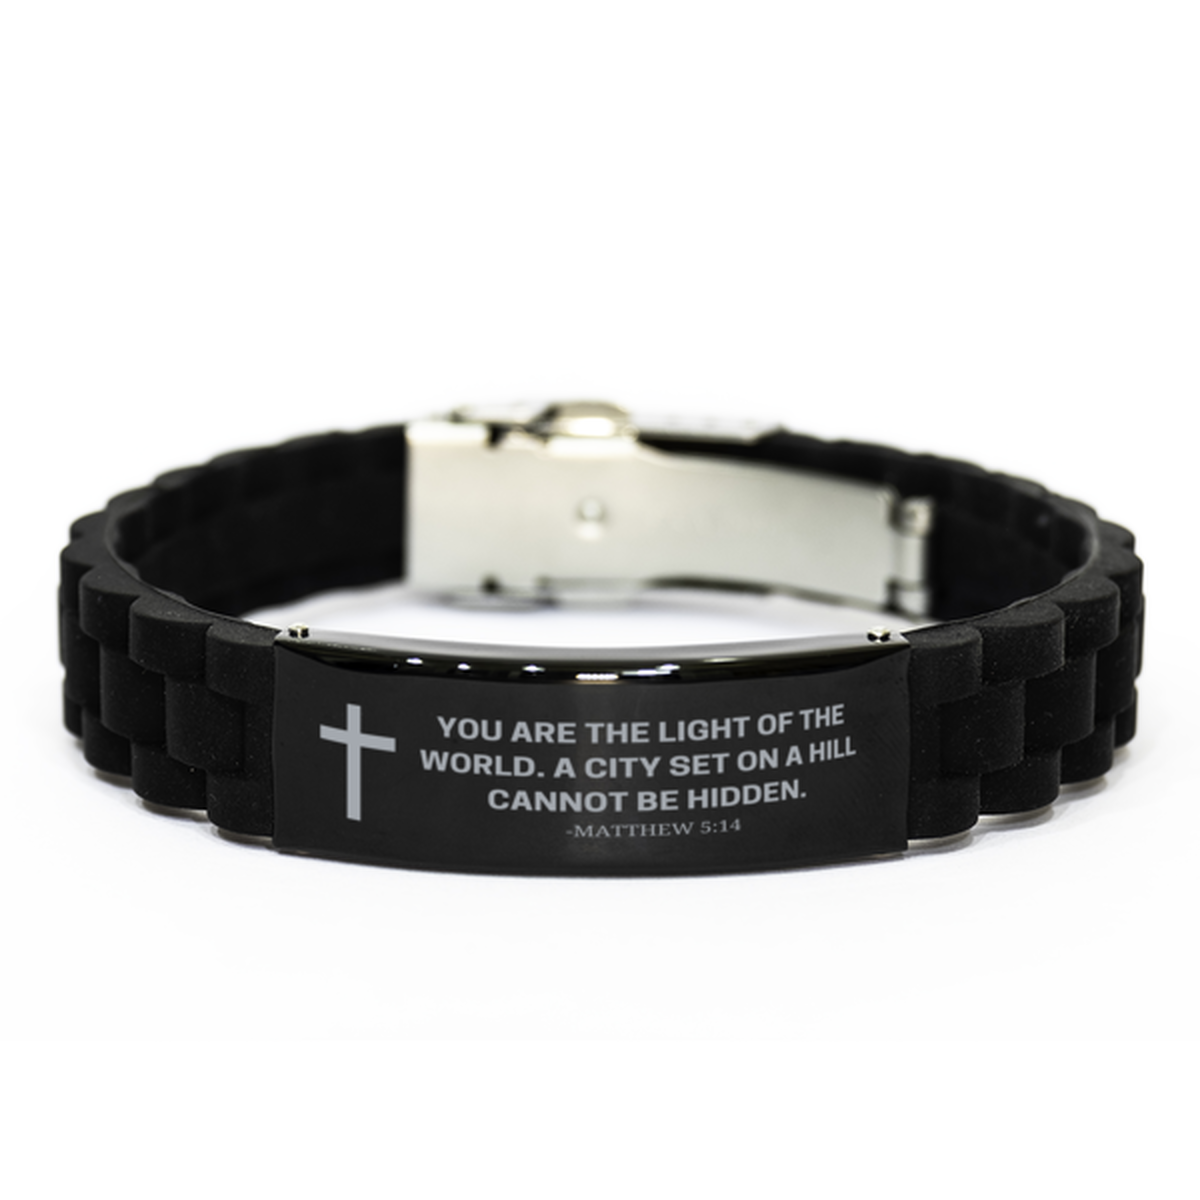 Baptism Gifts For Teenage Boys Girls, Christian Bible Verse Black Glidelock Clasp Bracelet, You are the light of the world, Catholic Confirmation Gifts for Son, Godson, Grandson, Nephew